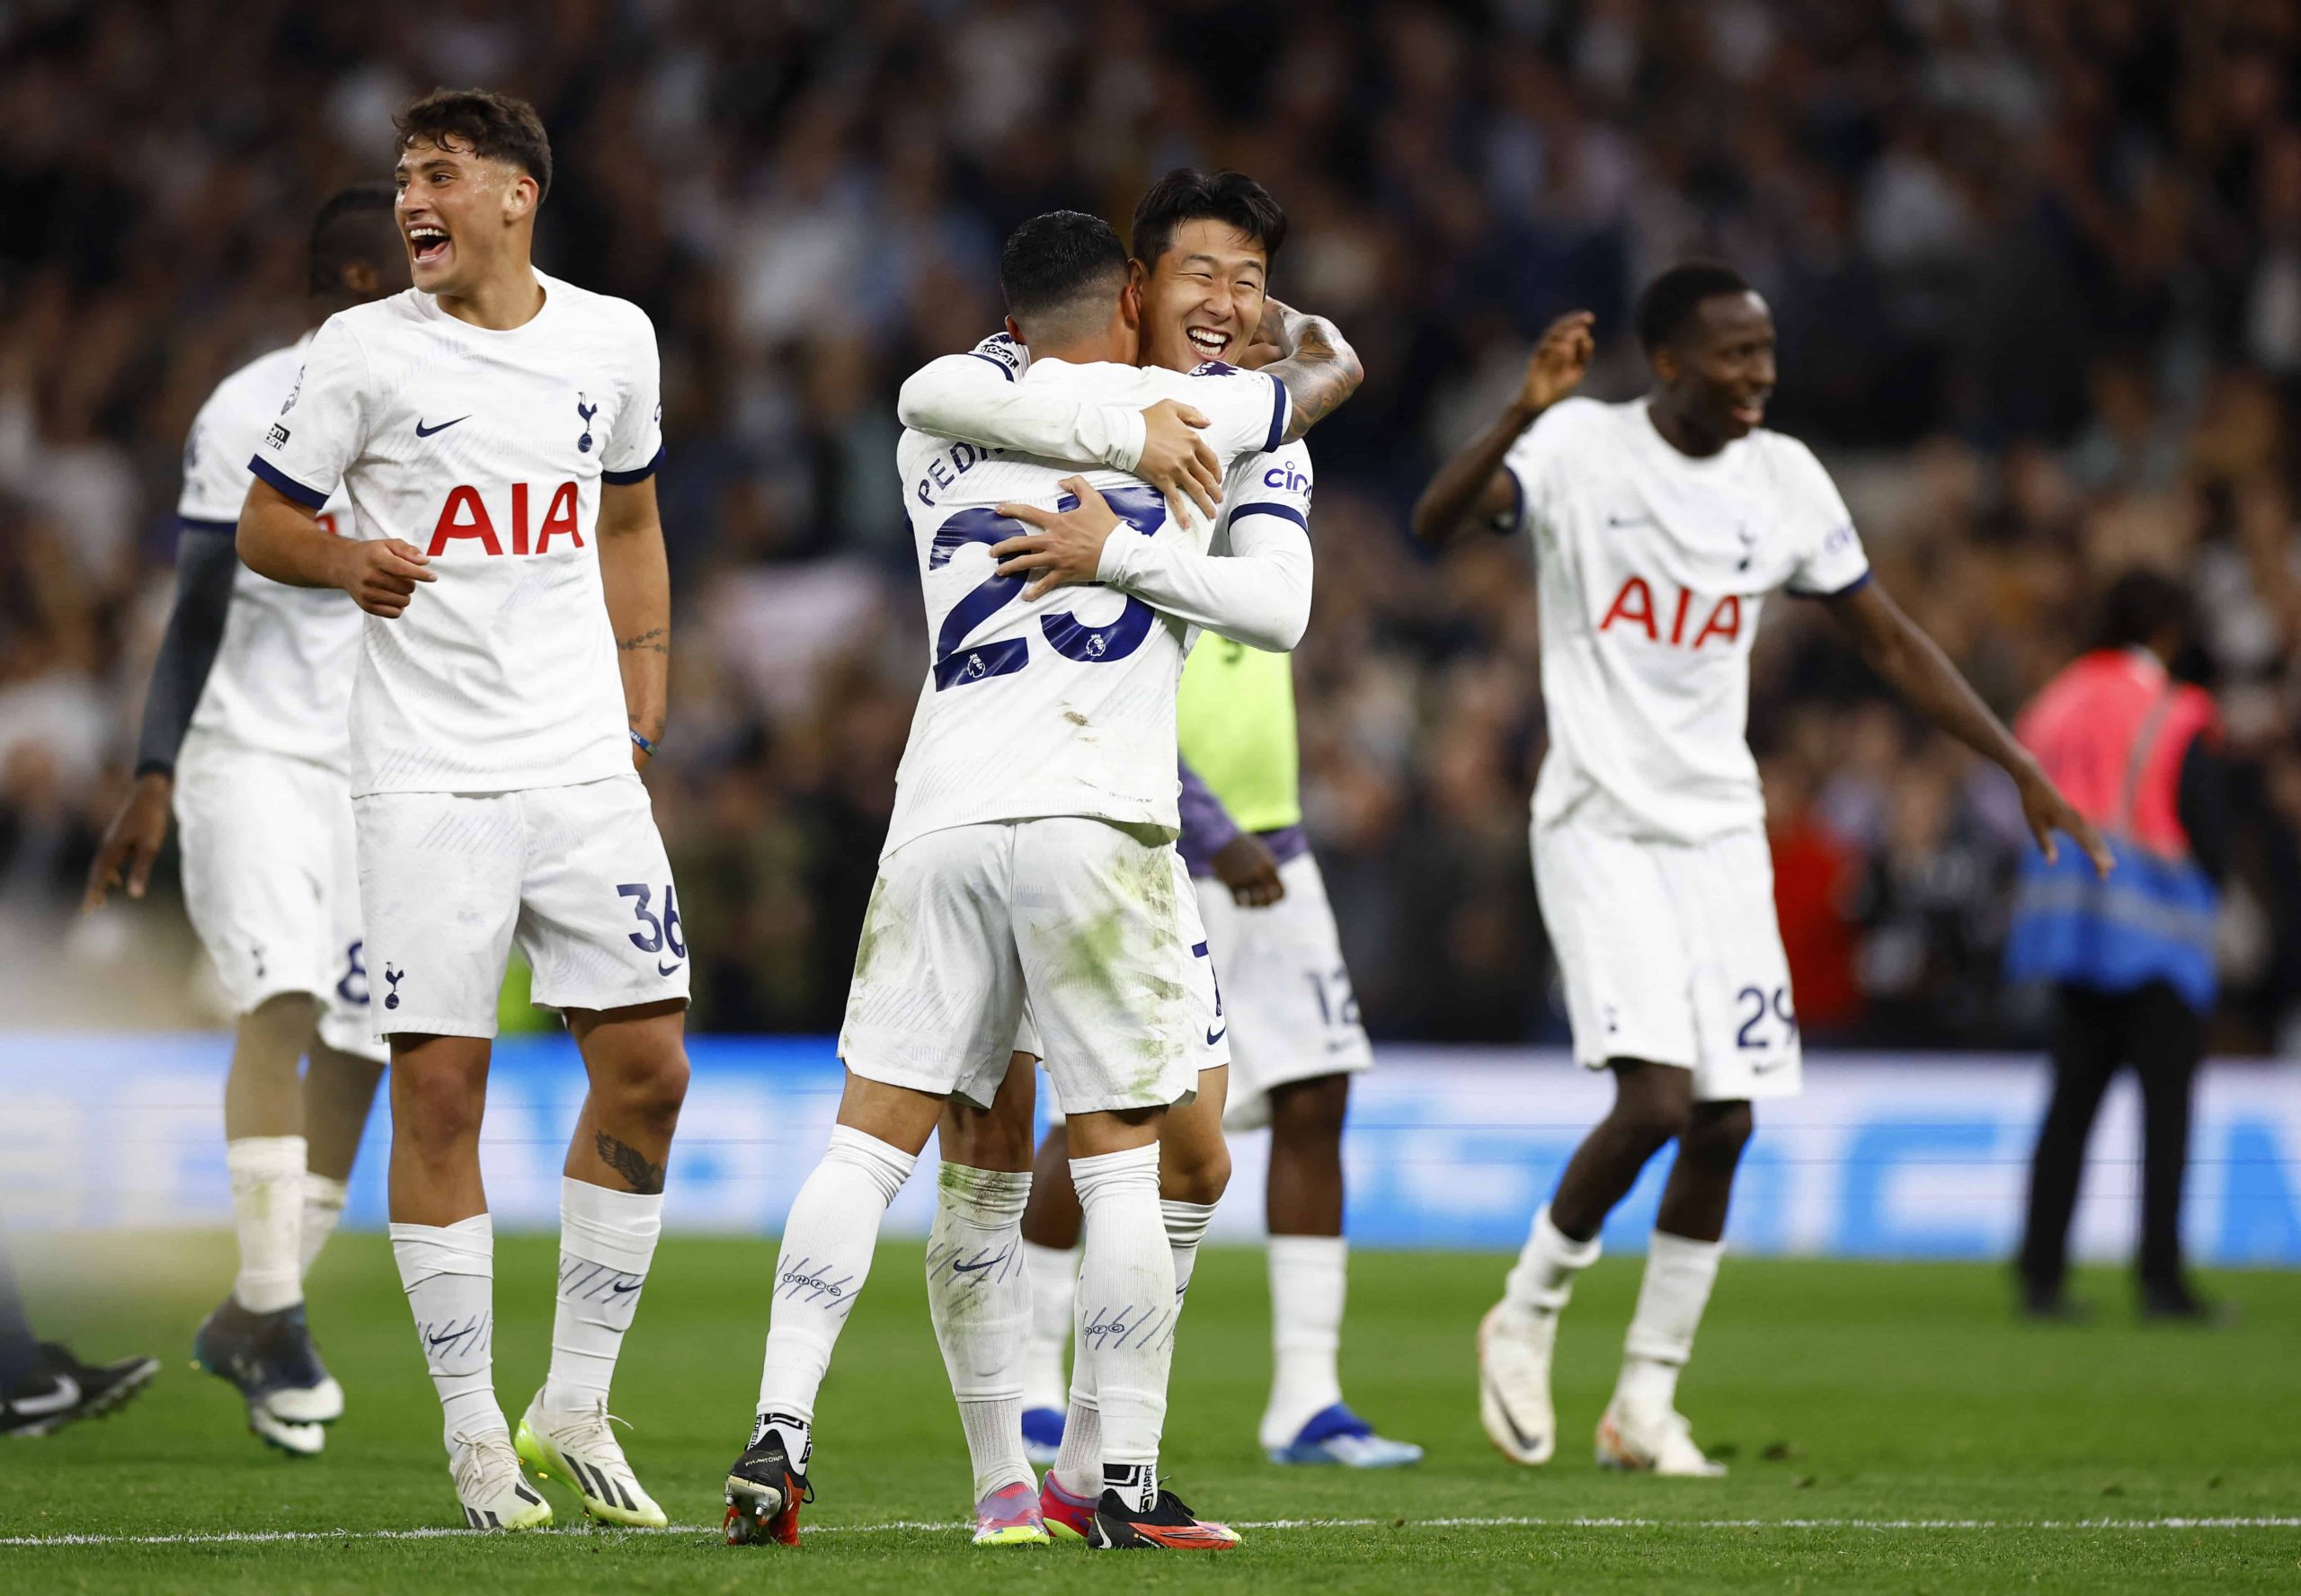 Tottenham secured a victory against arsenal